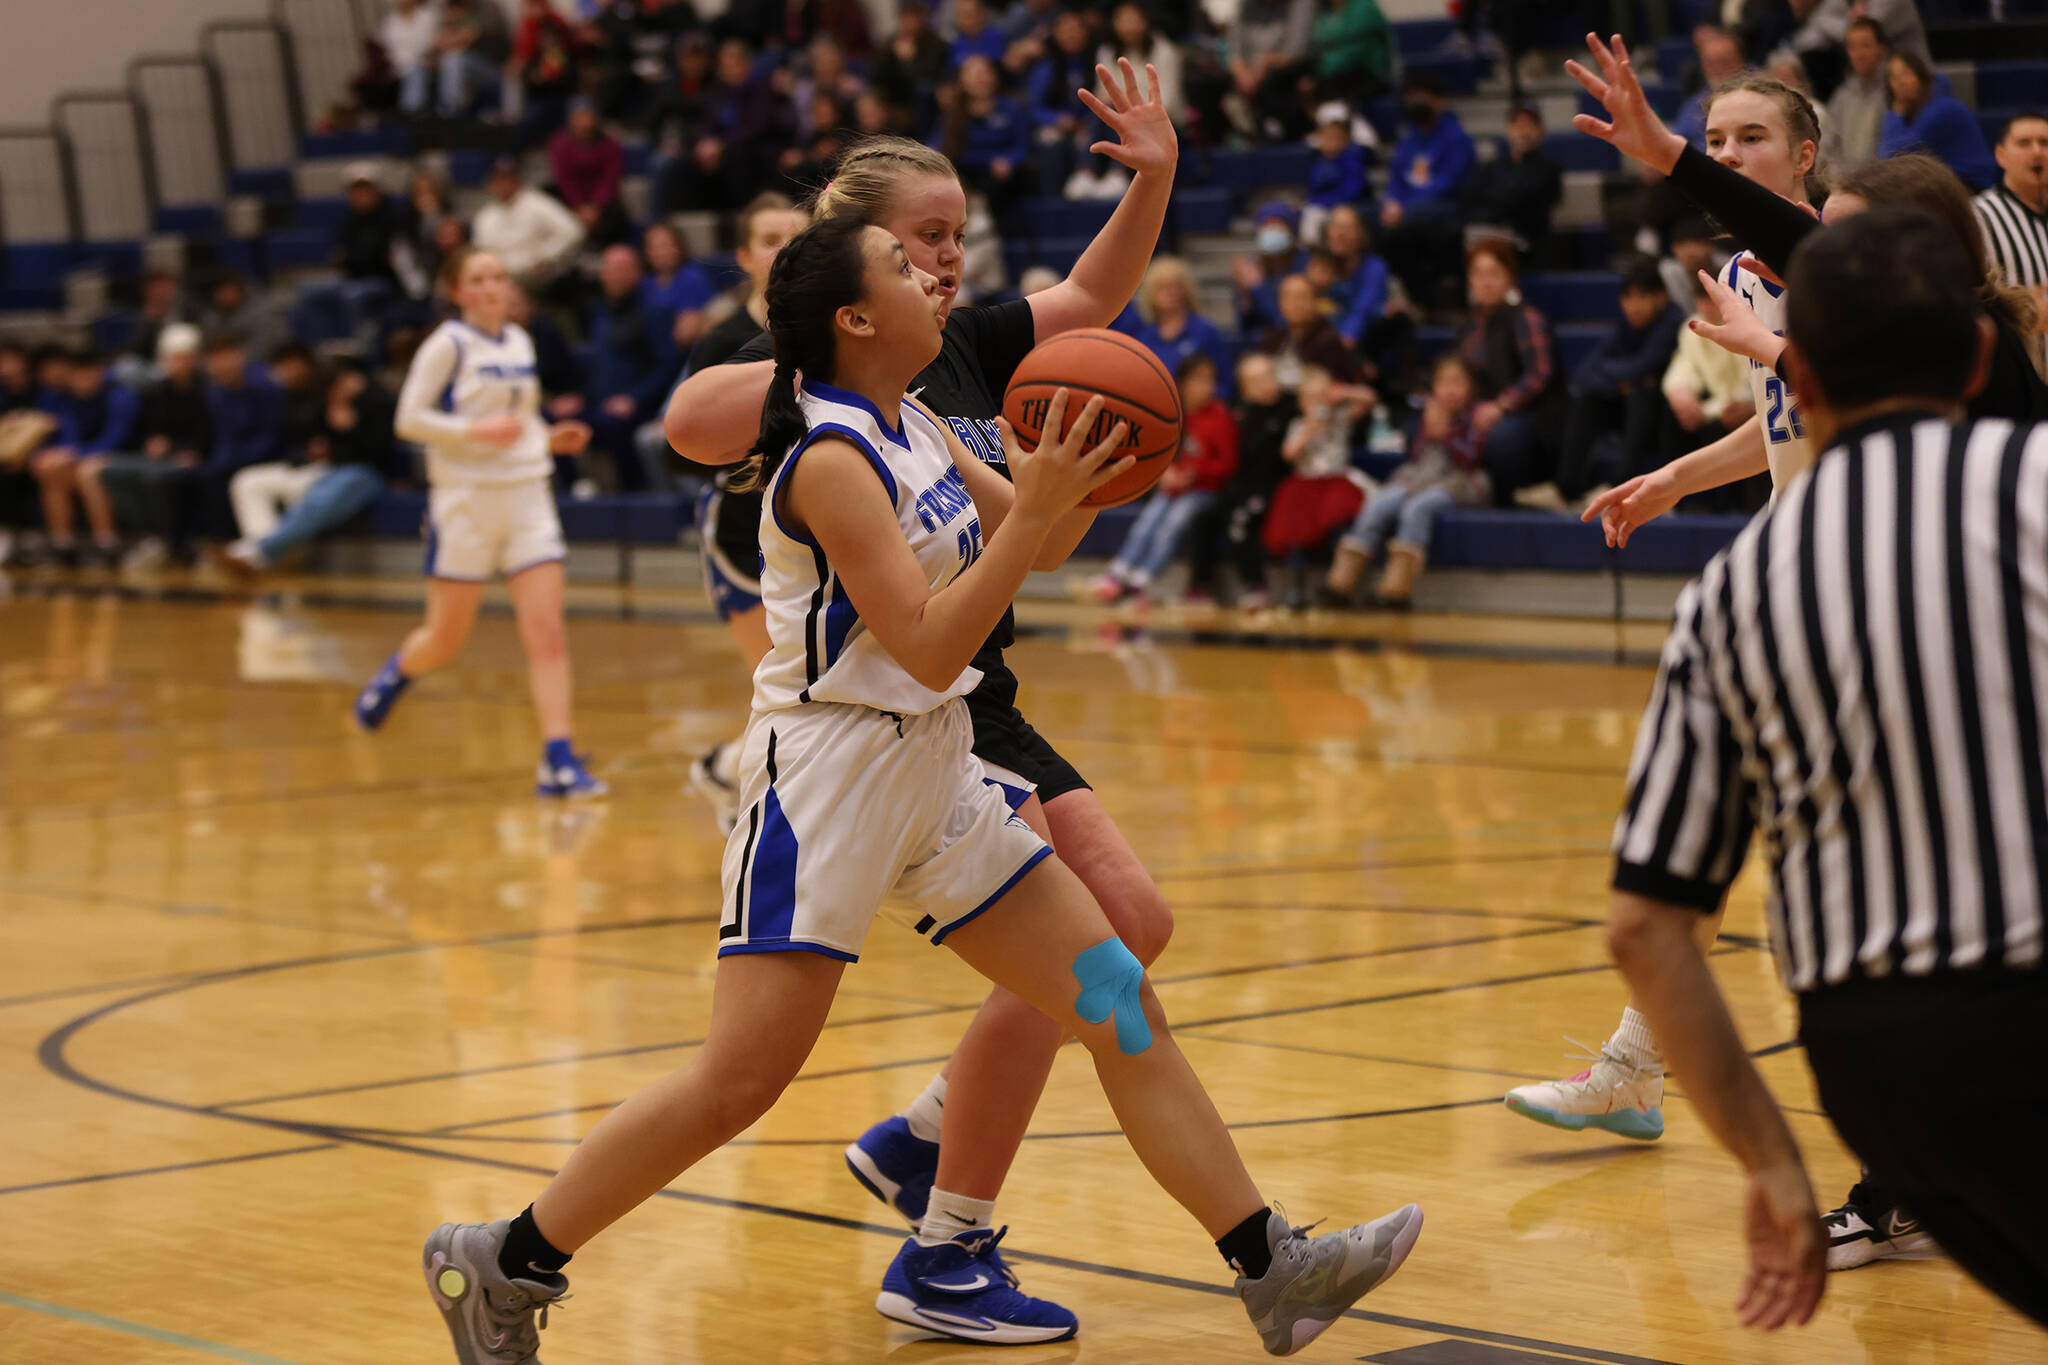 Sophomore Addison Wilson races toward the basket late in TMHS' comeback win. Wilson was one of four players on her team to score 9 points. (Ben Hohenstatt / Juneau Empire)